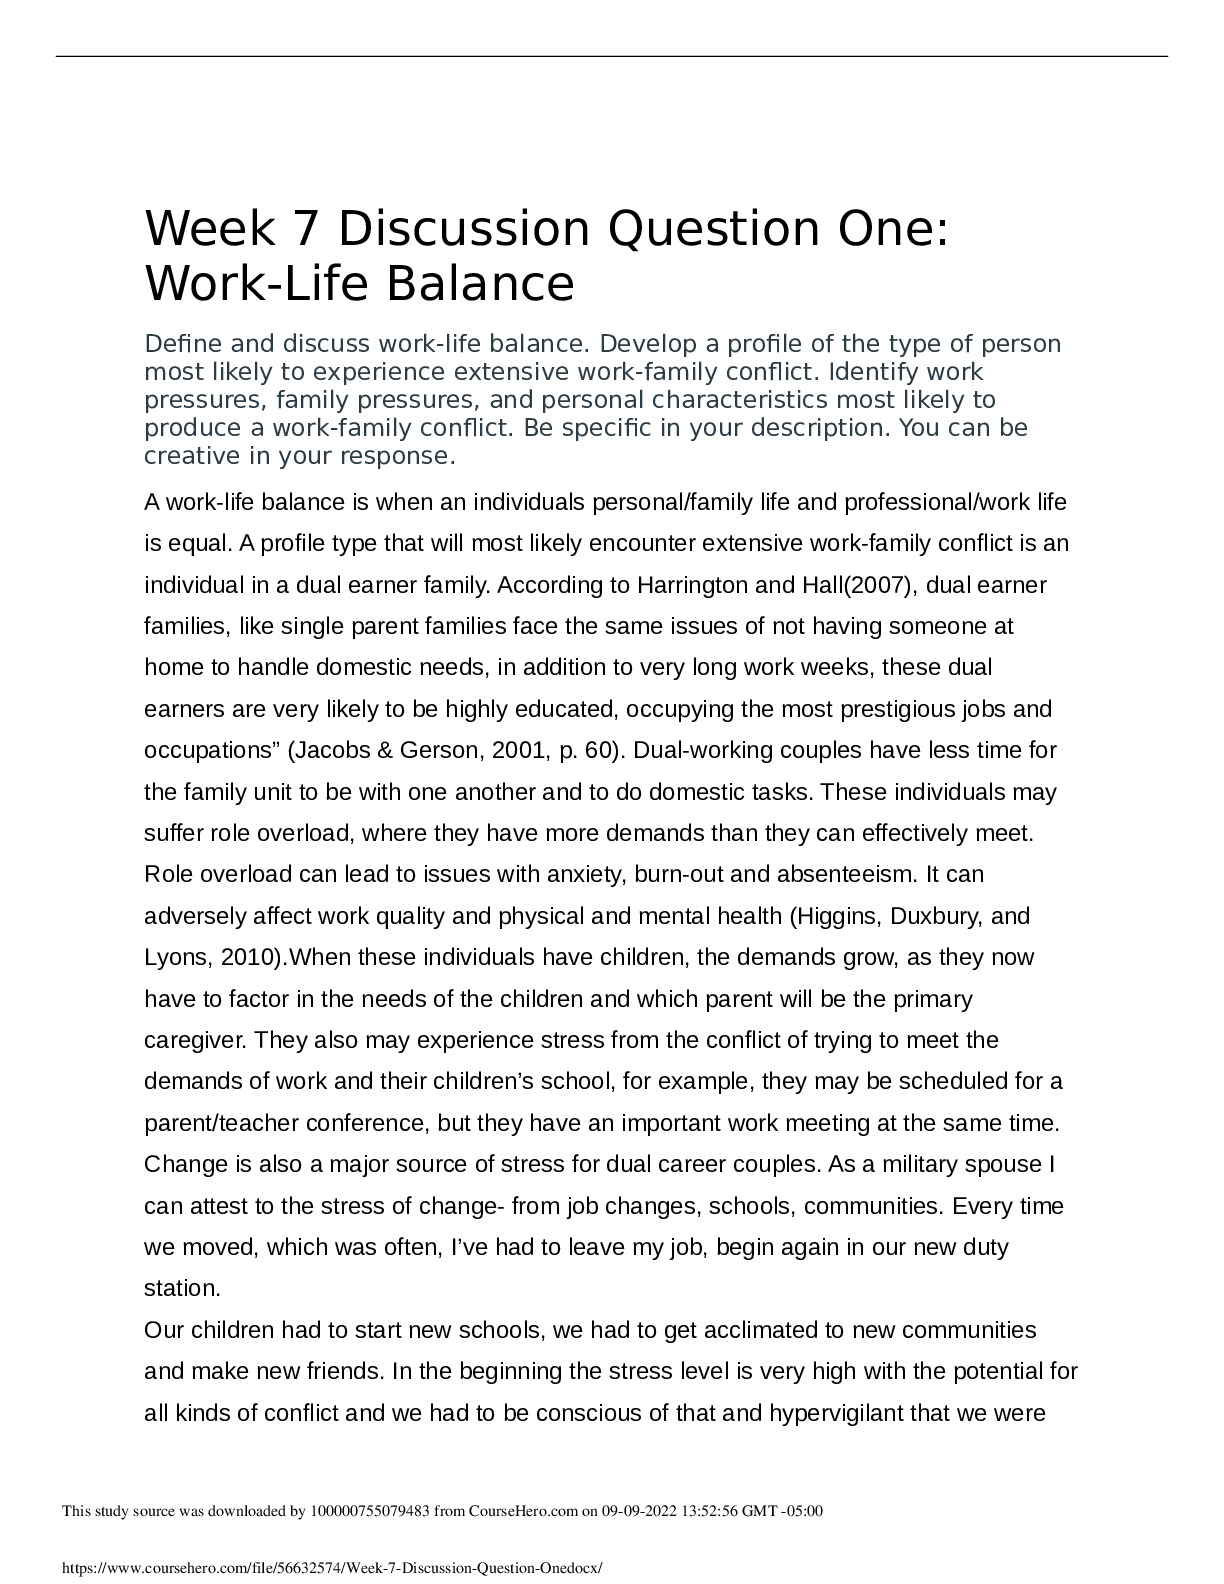 Week_7_Discussion_Question_One.docx